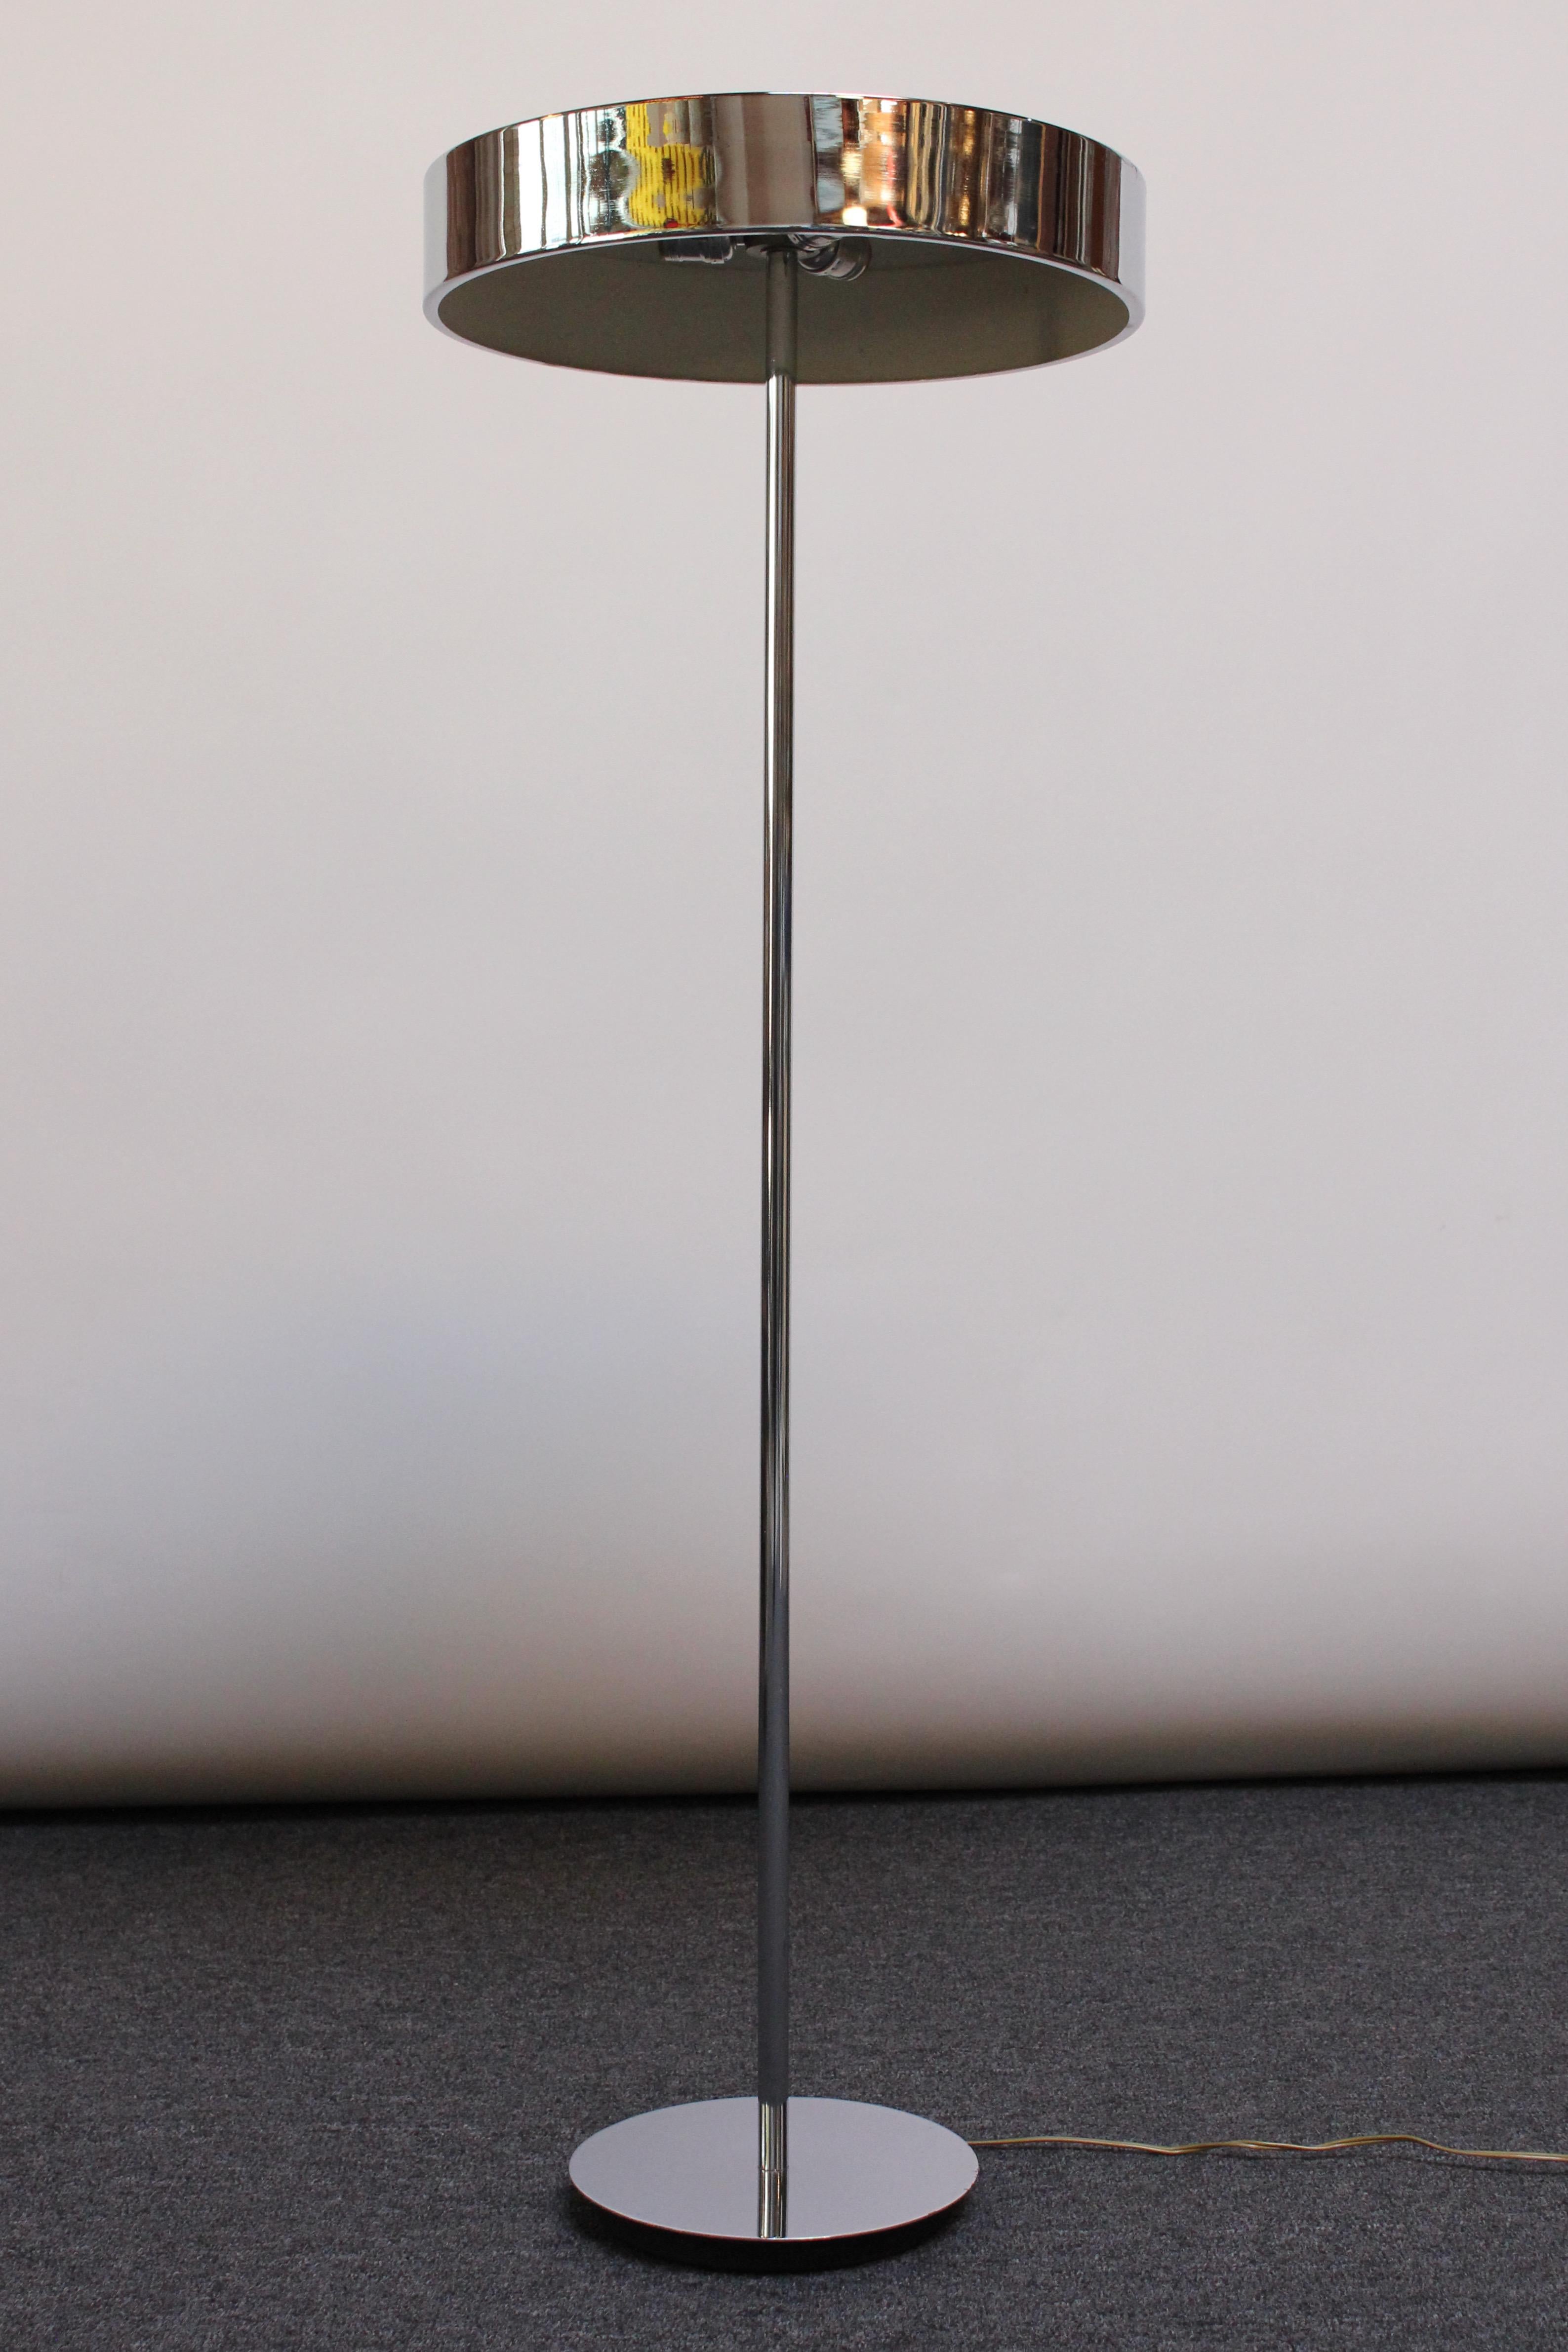 American Modern floor lamp consisting of a large, flat, cylindrical chrome shade supported by tubular chrome stem and circular base with a black weighted underside. This design is reminiscent of one by Ulrich Franzen, though the artist is unknown.